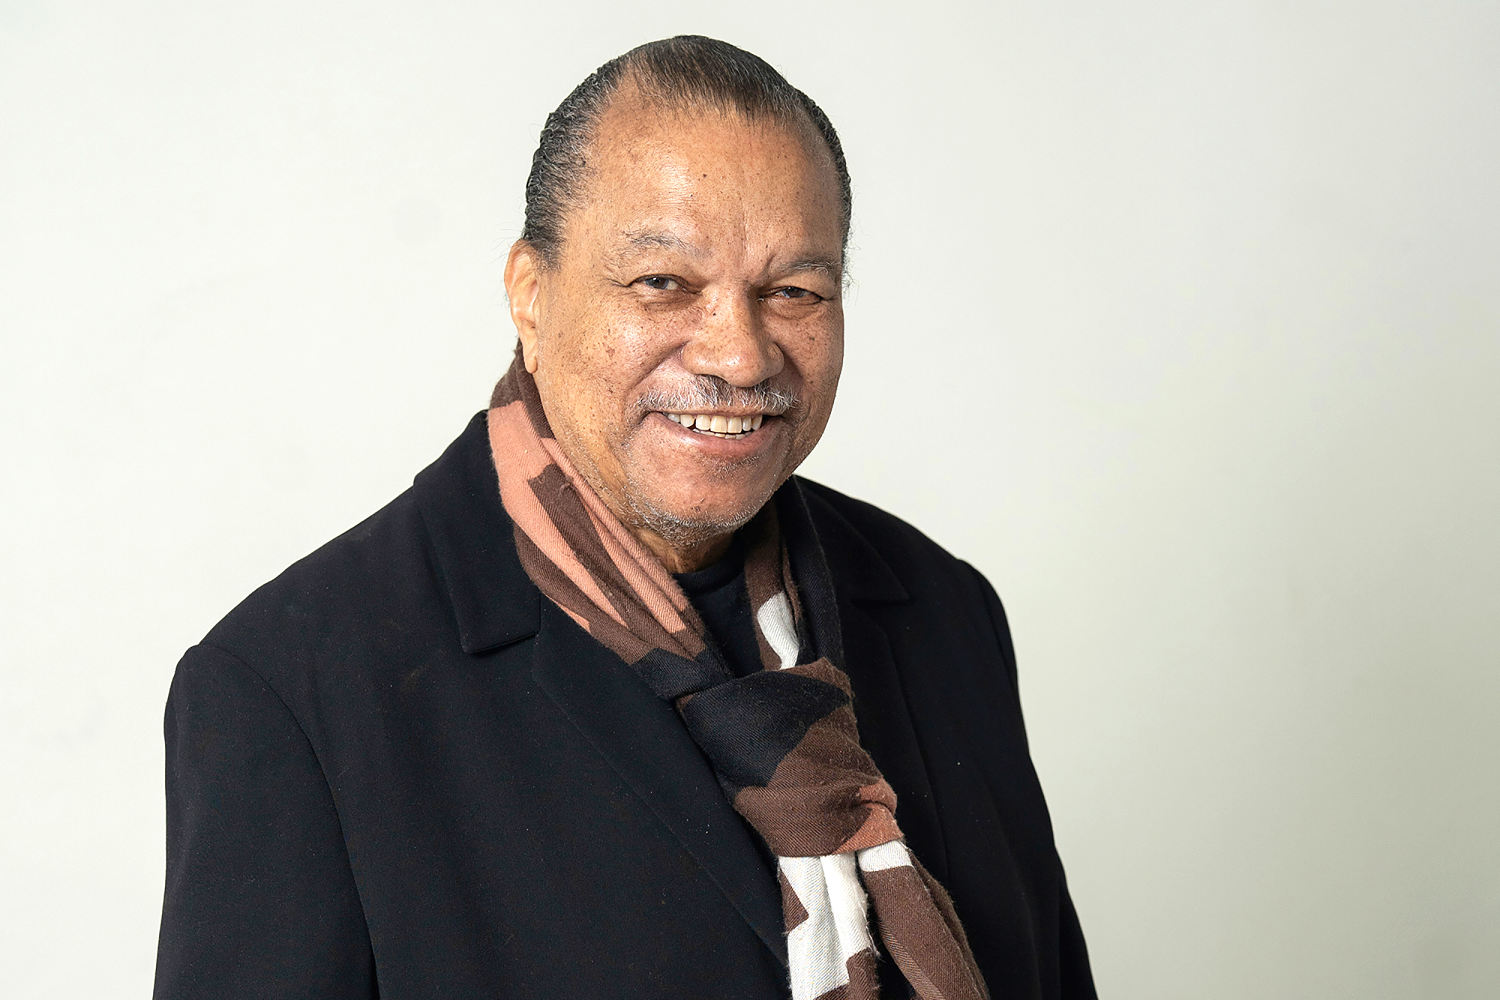 Billy Dee Williams defends blackface, says actors 'should do anything' they want to do